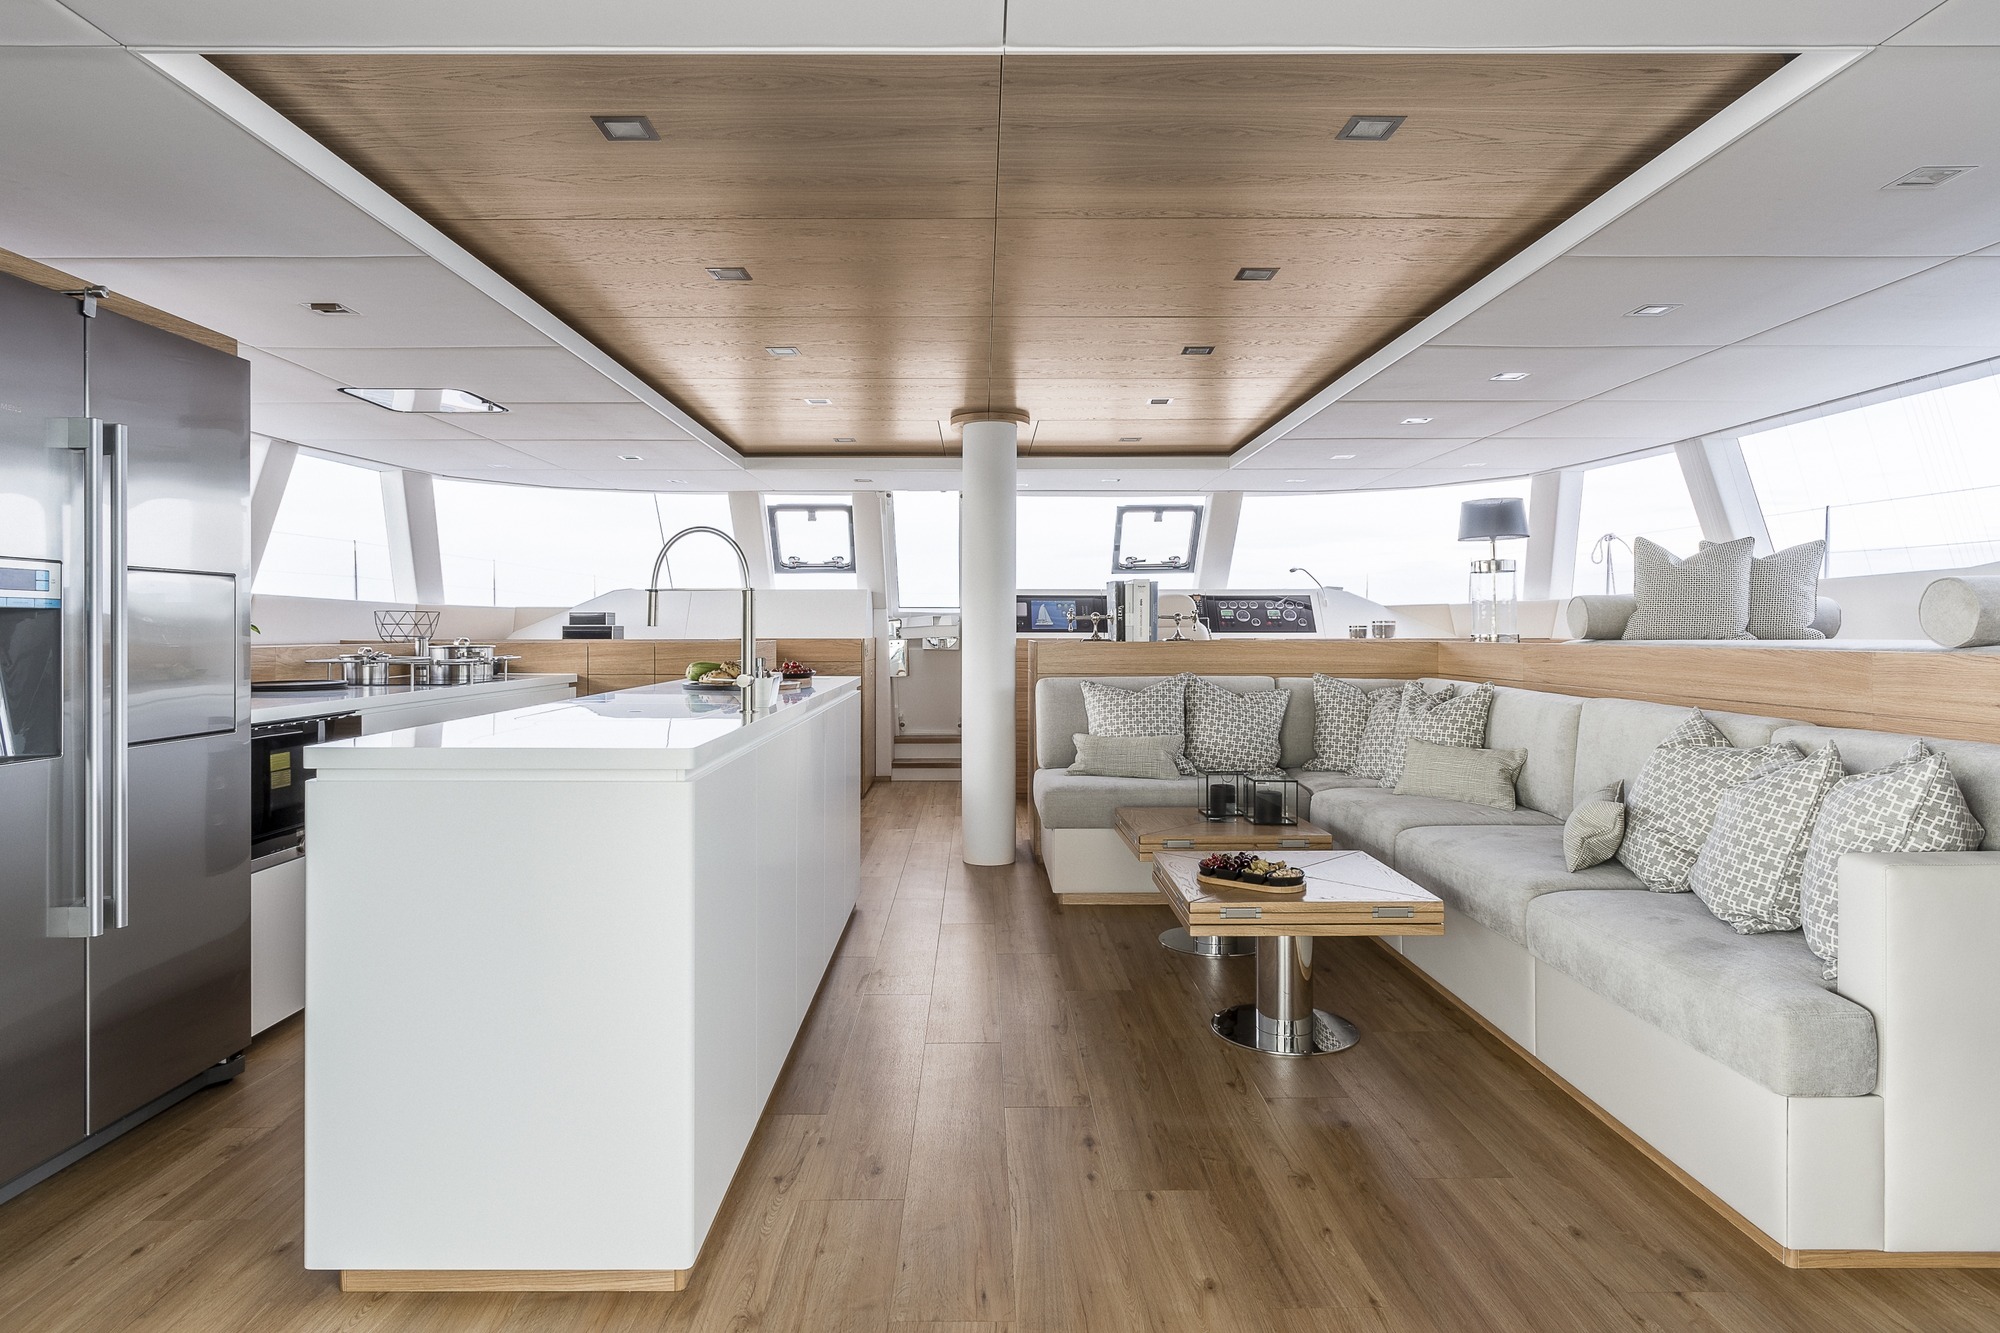 Main Salon View Forward With Galley